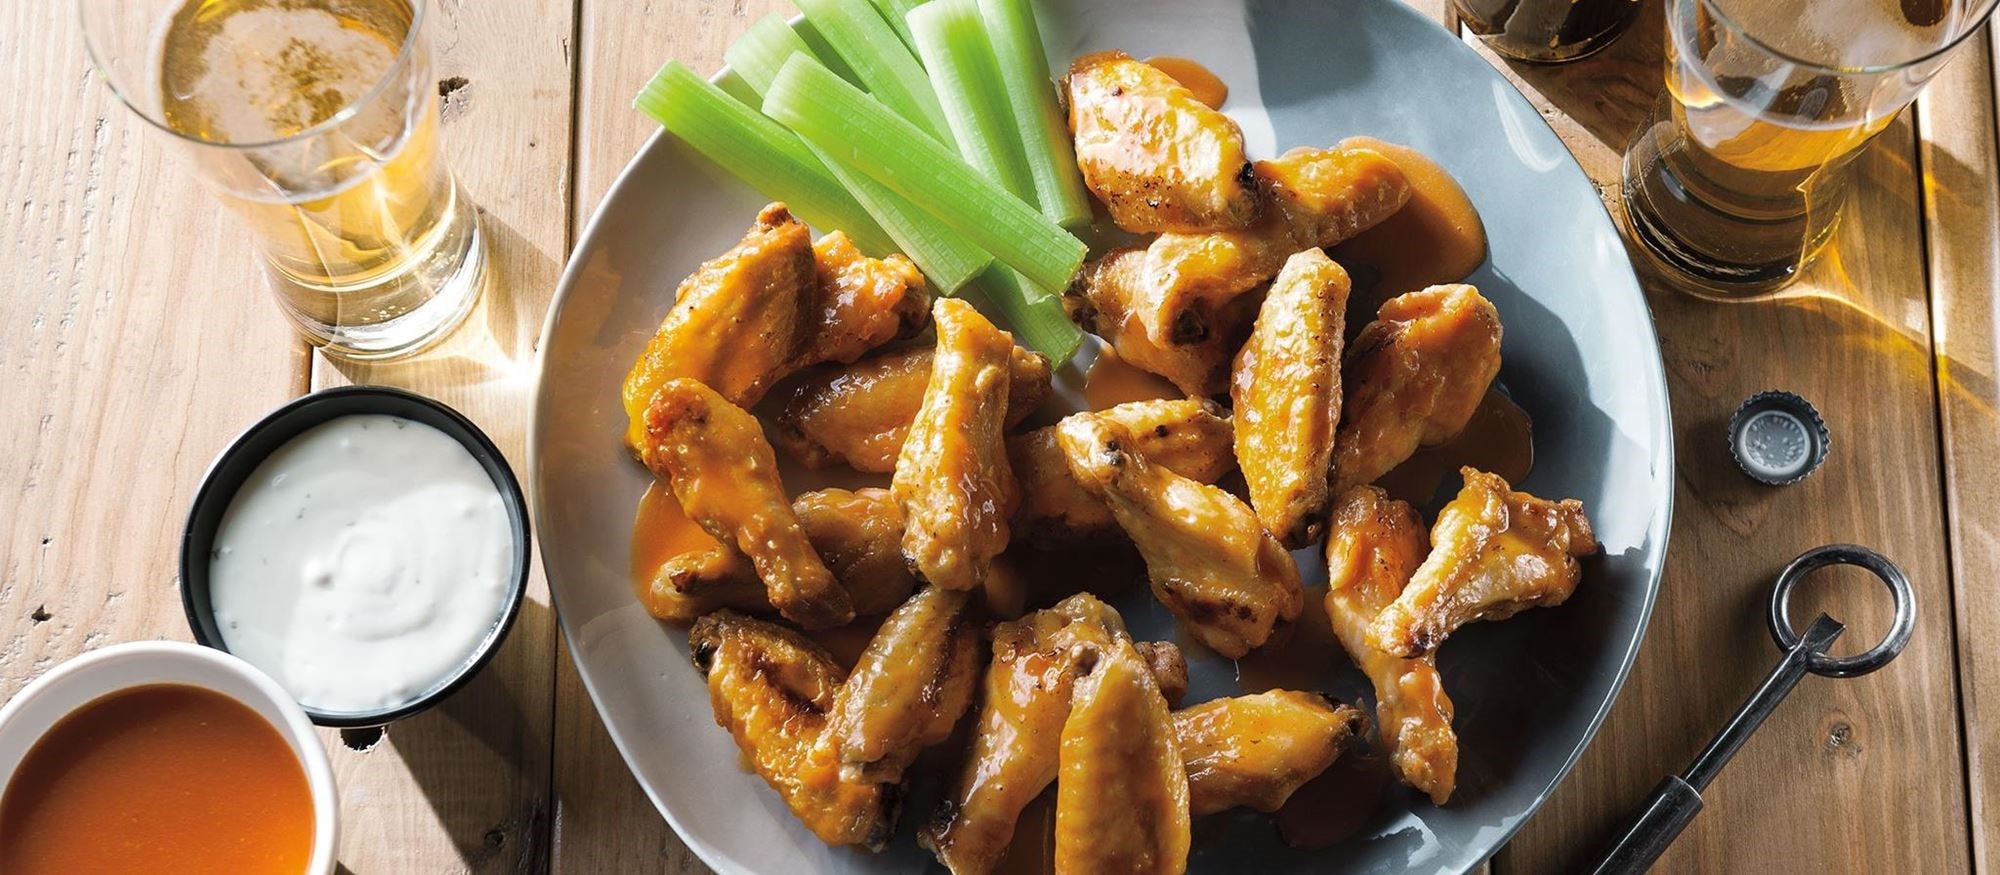 FOOD_CHICKEN_WINGS_SLG_100715